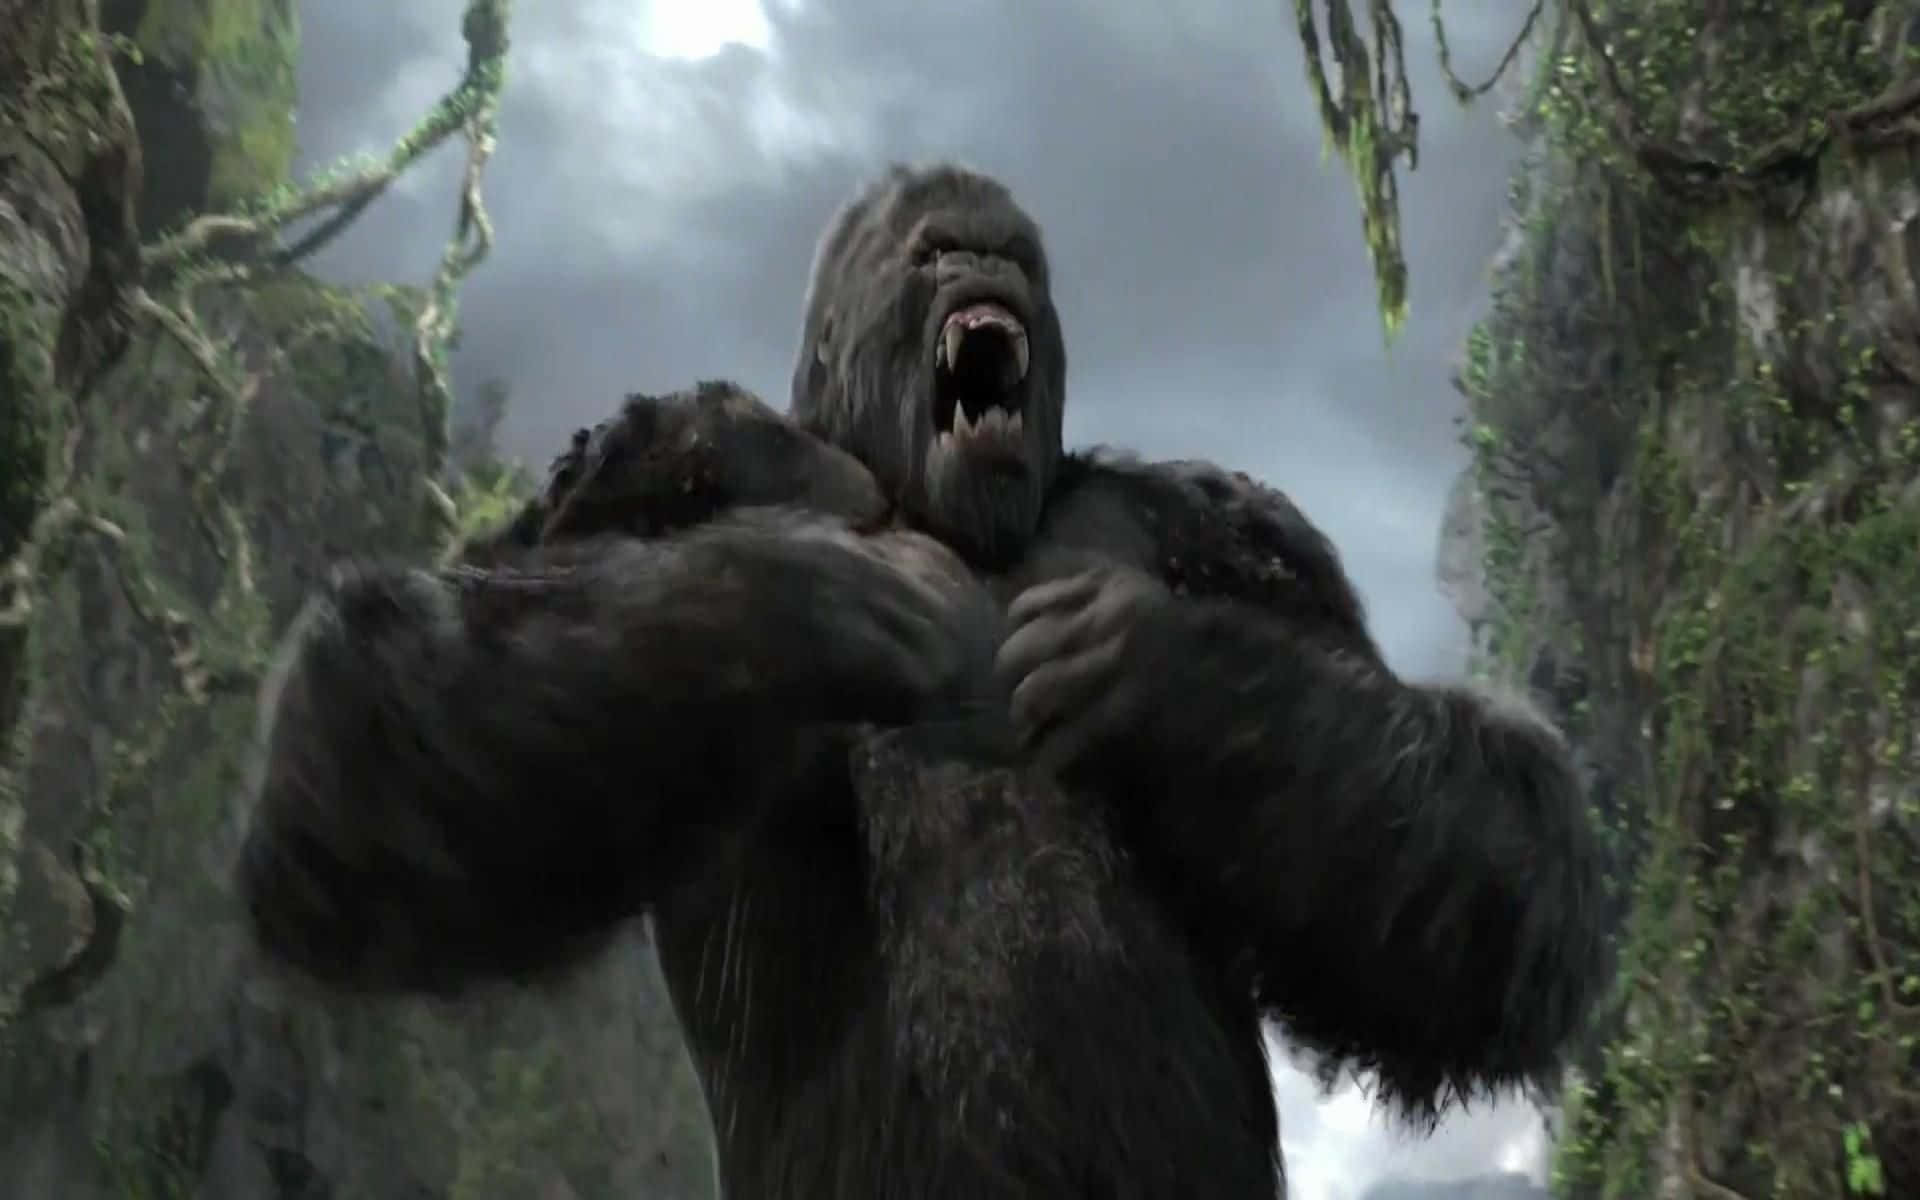 King Kong faces off against a swarm of invading planes